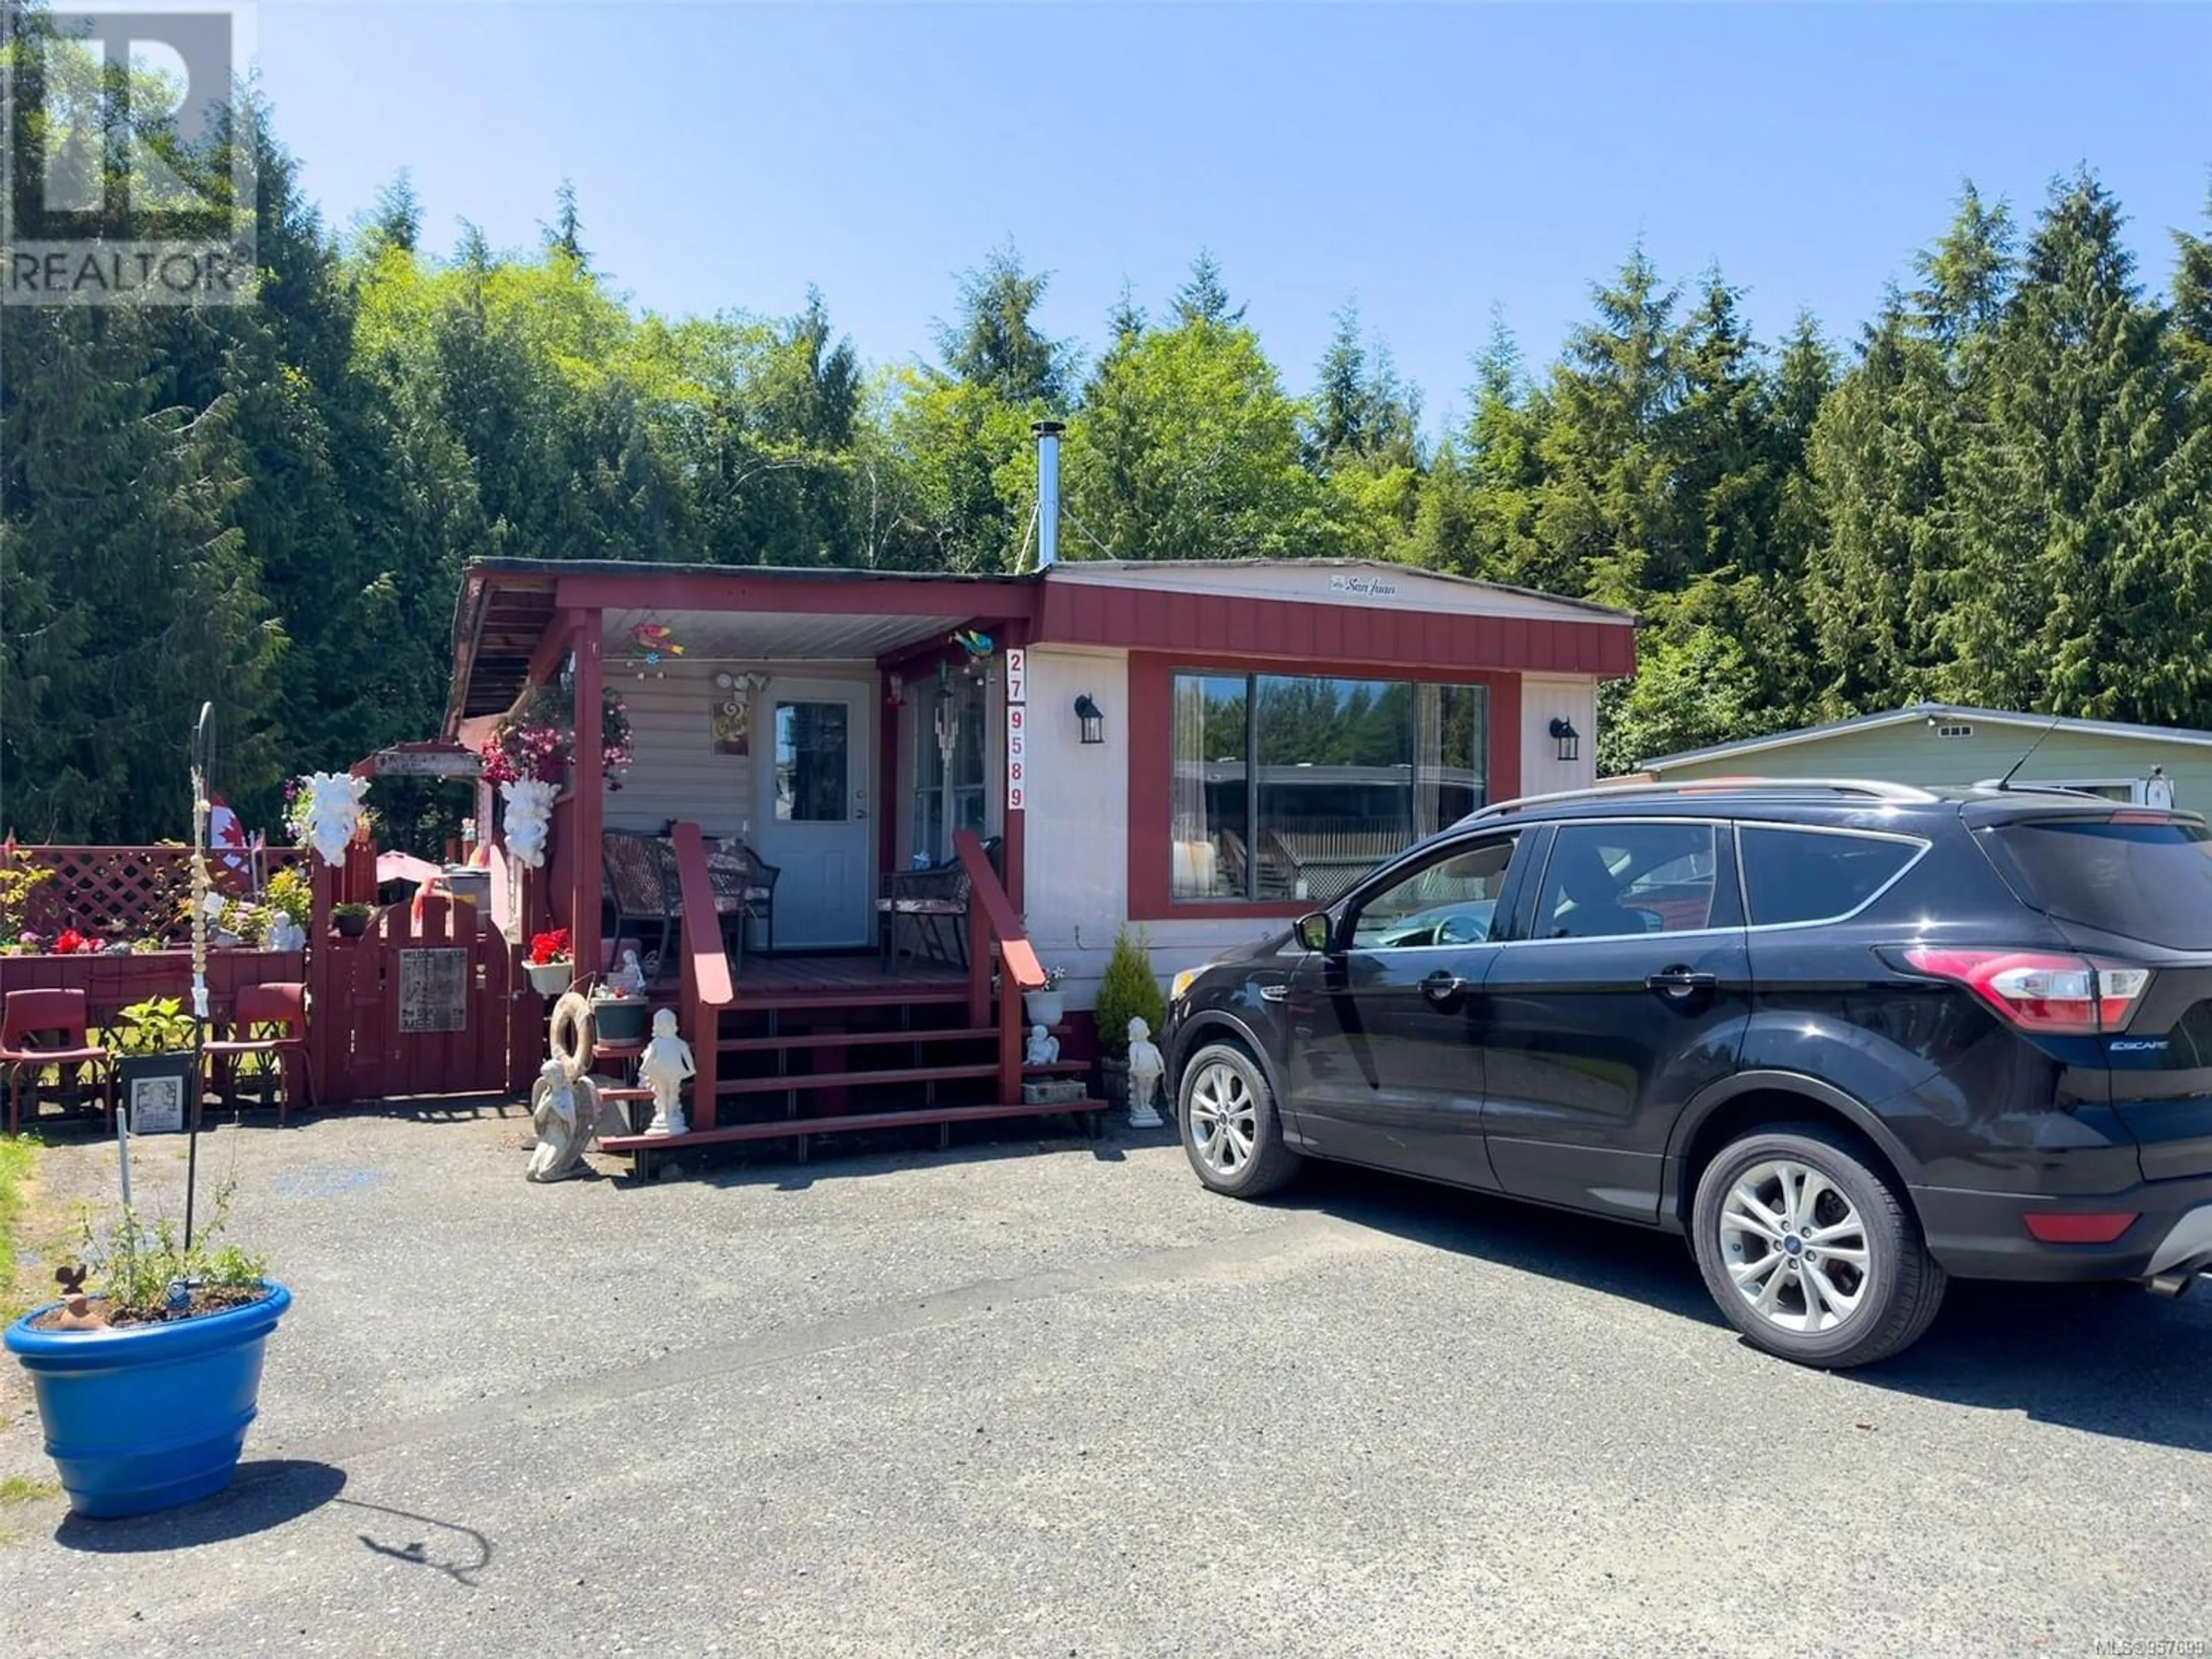 Street view for 27 9589 Chancellor Hts, Port Hardy British Columbia V0N1P0